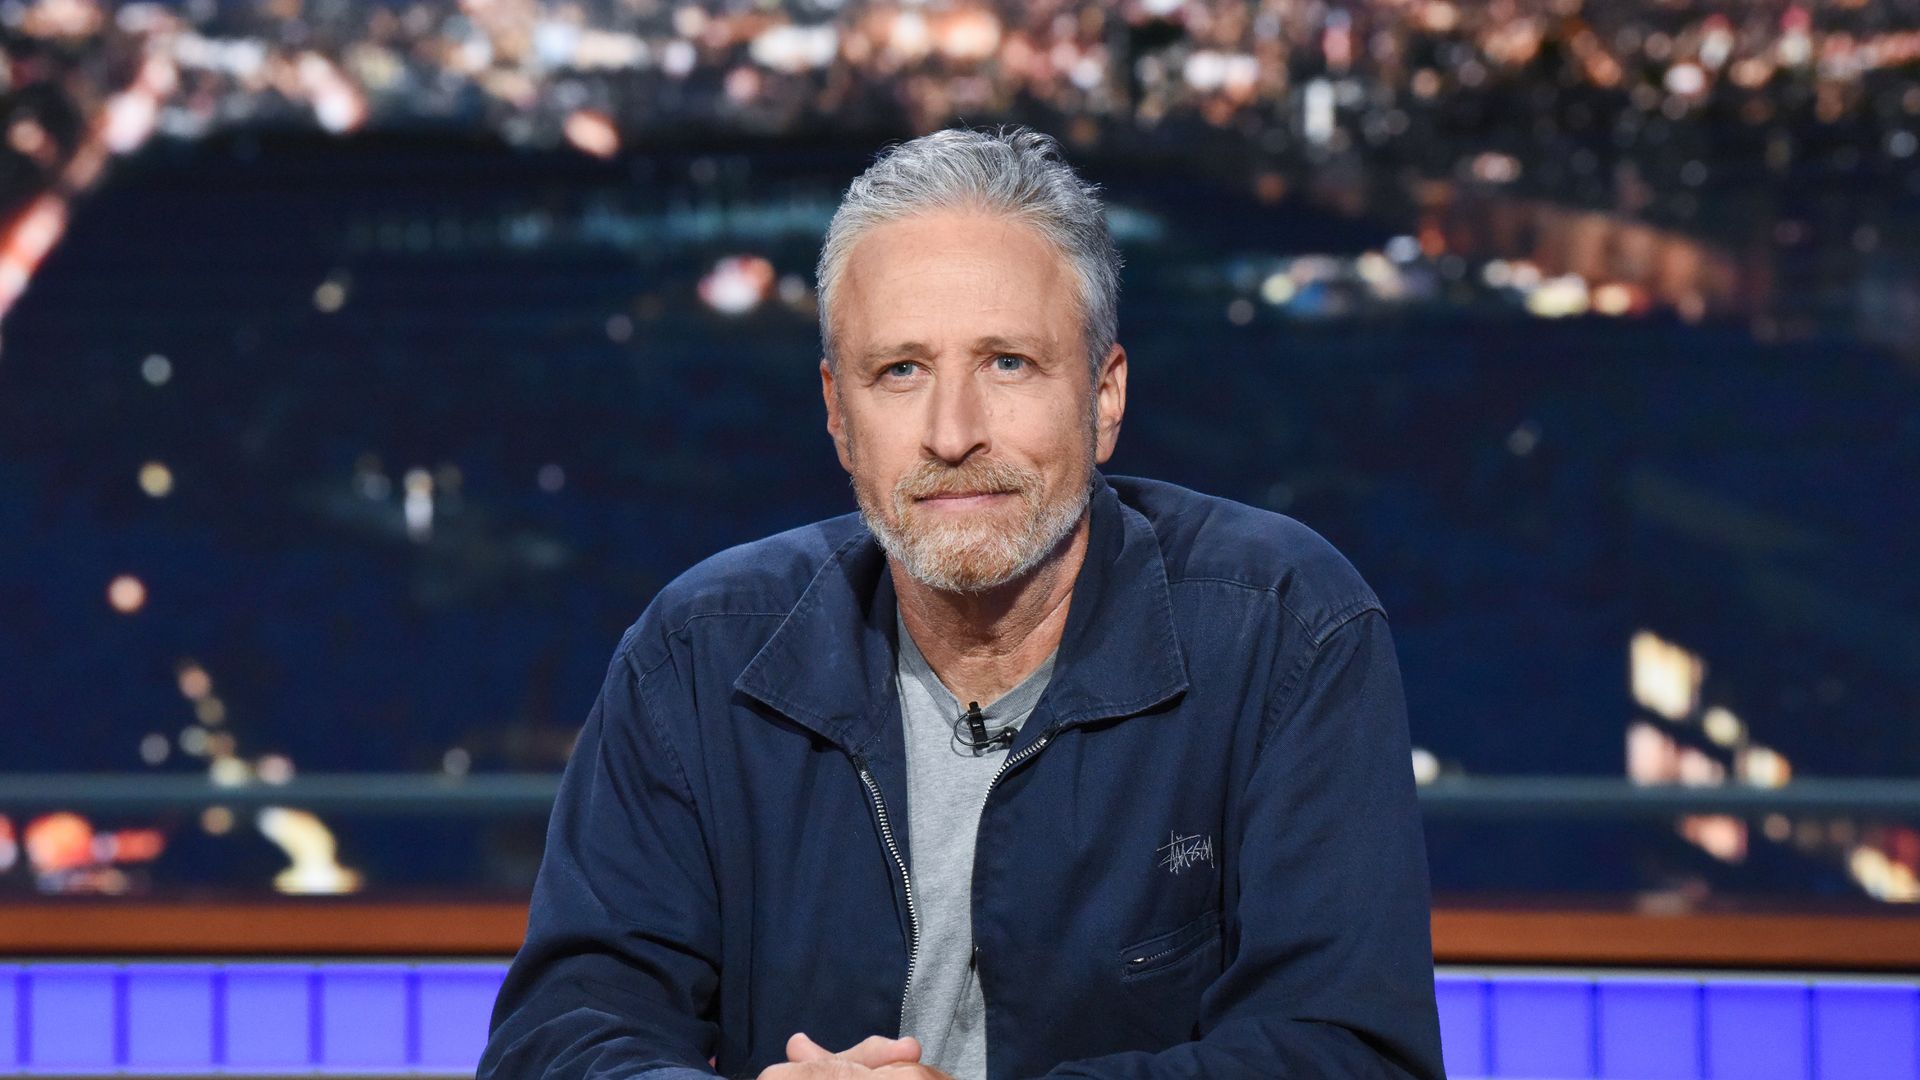 Why did Jon Stewart ever leave The Daily Show in the first place? Inside his unexpected departure and comeback thumbnail